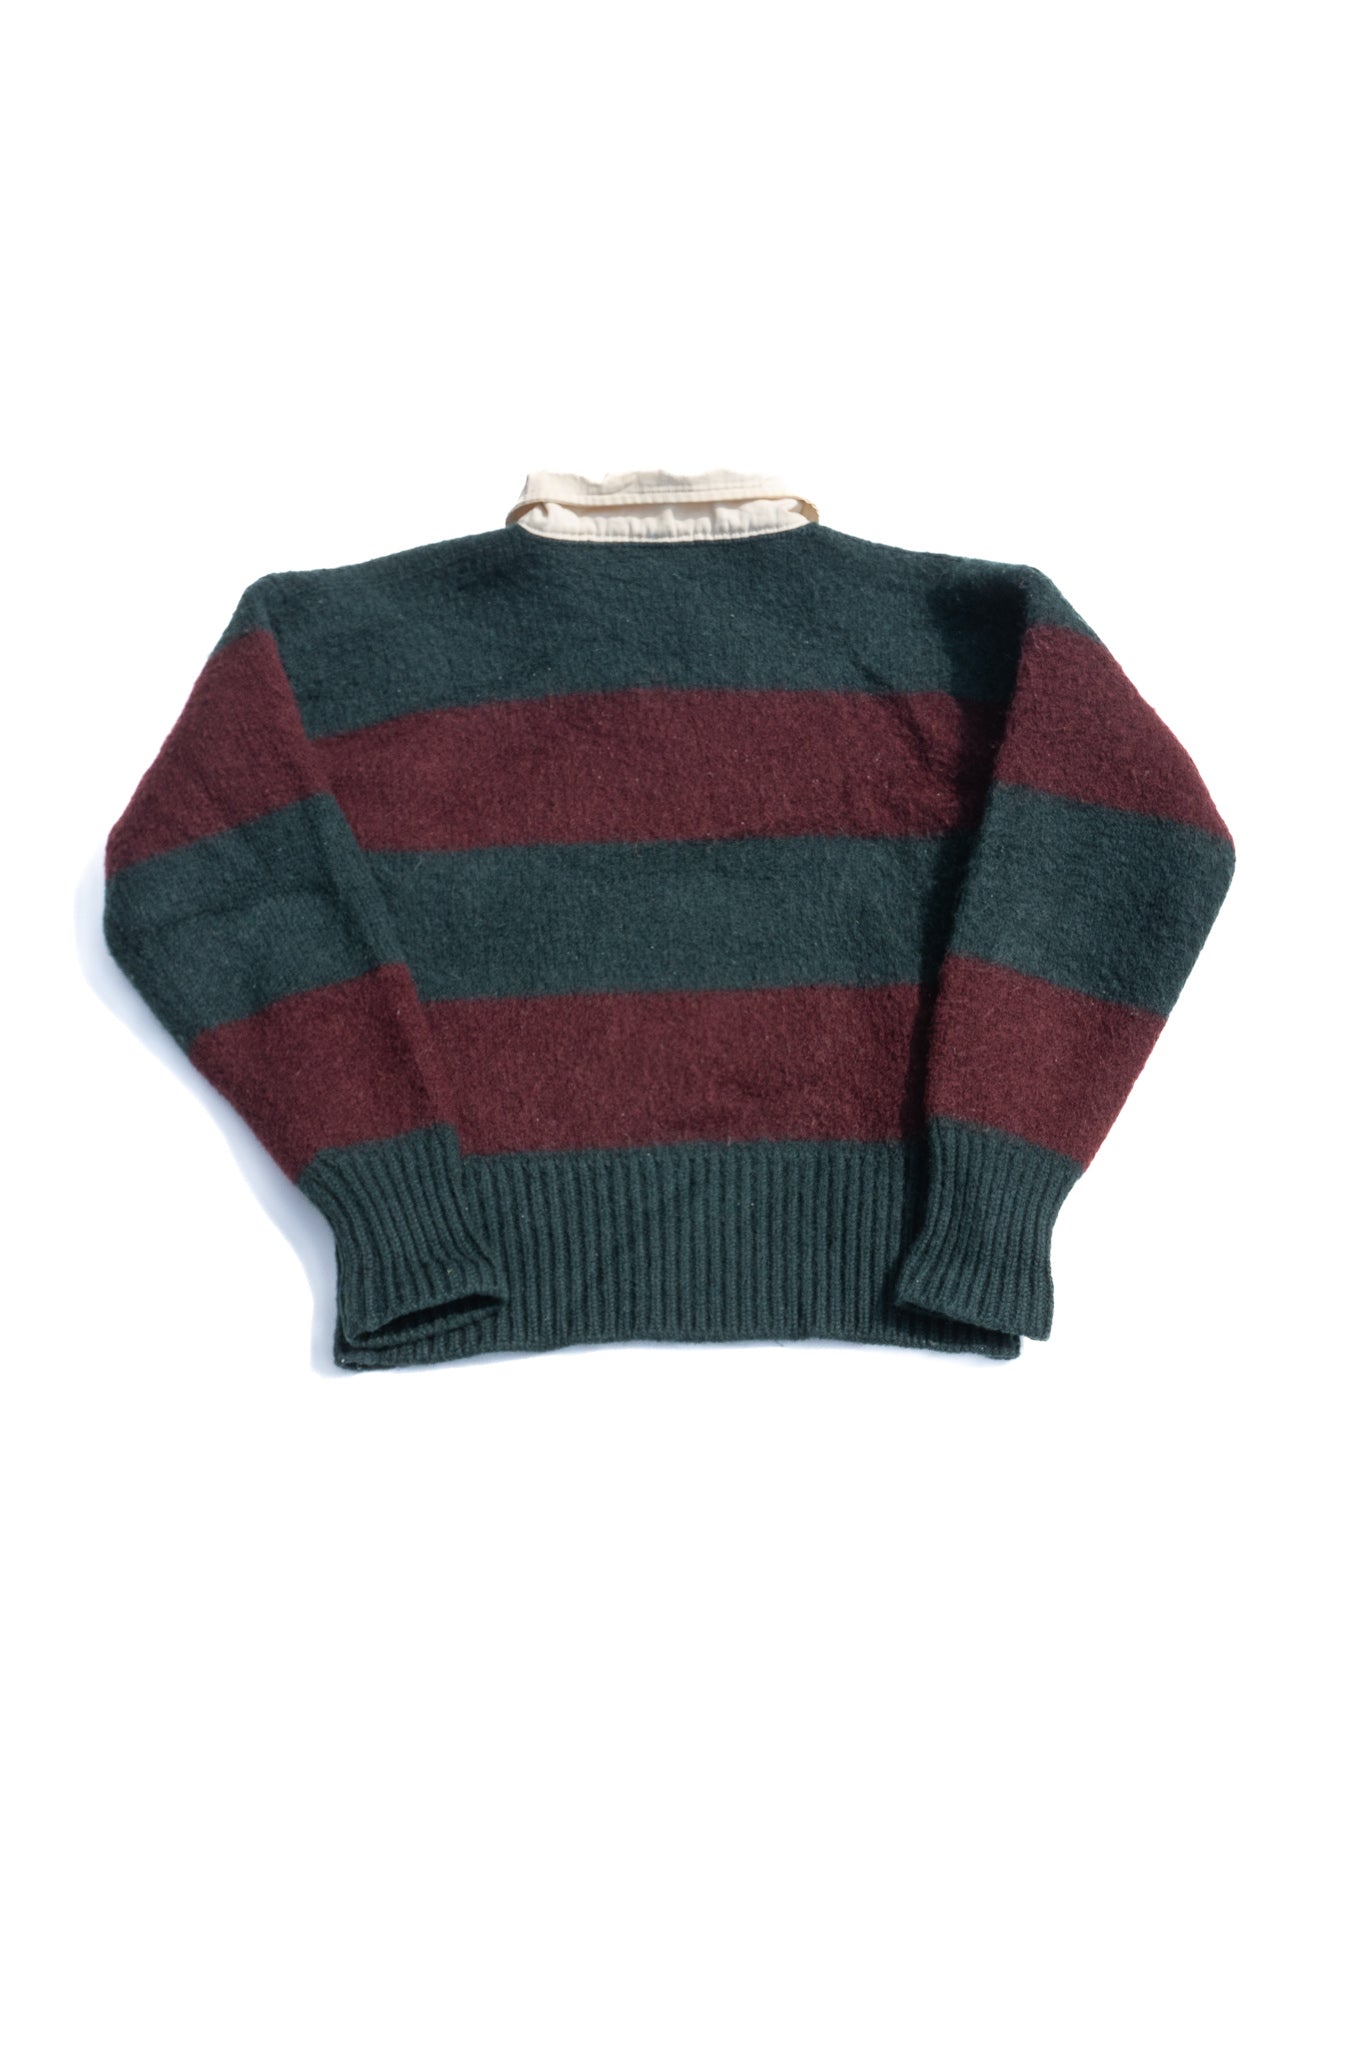 Polo Ralph Lauren Rugby Sweater